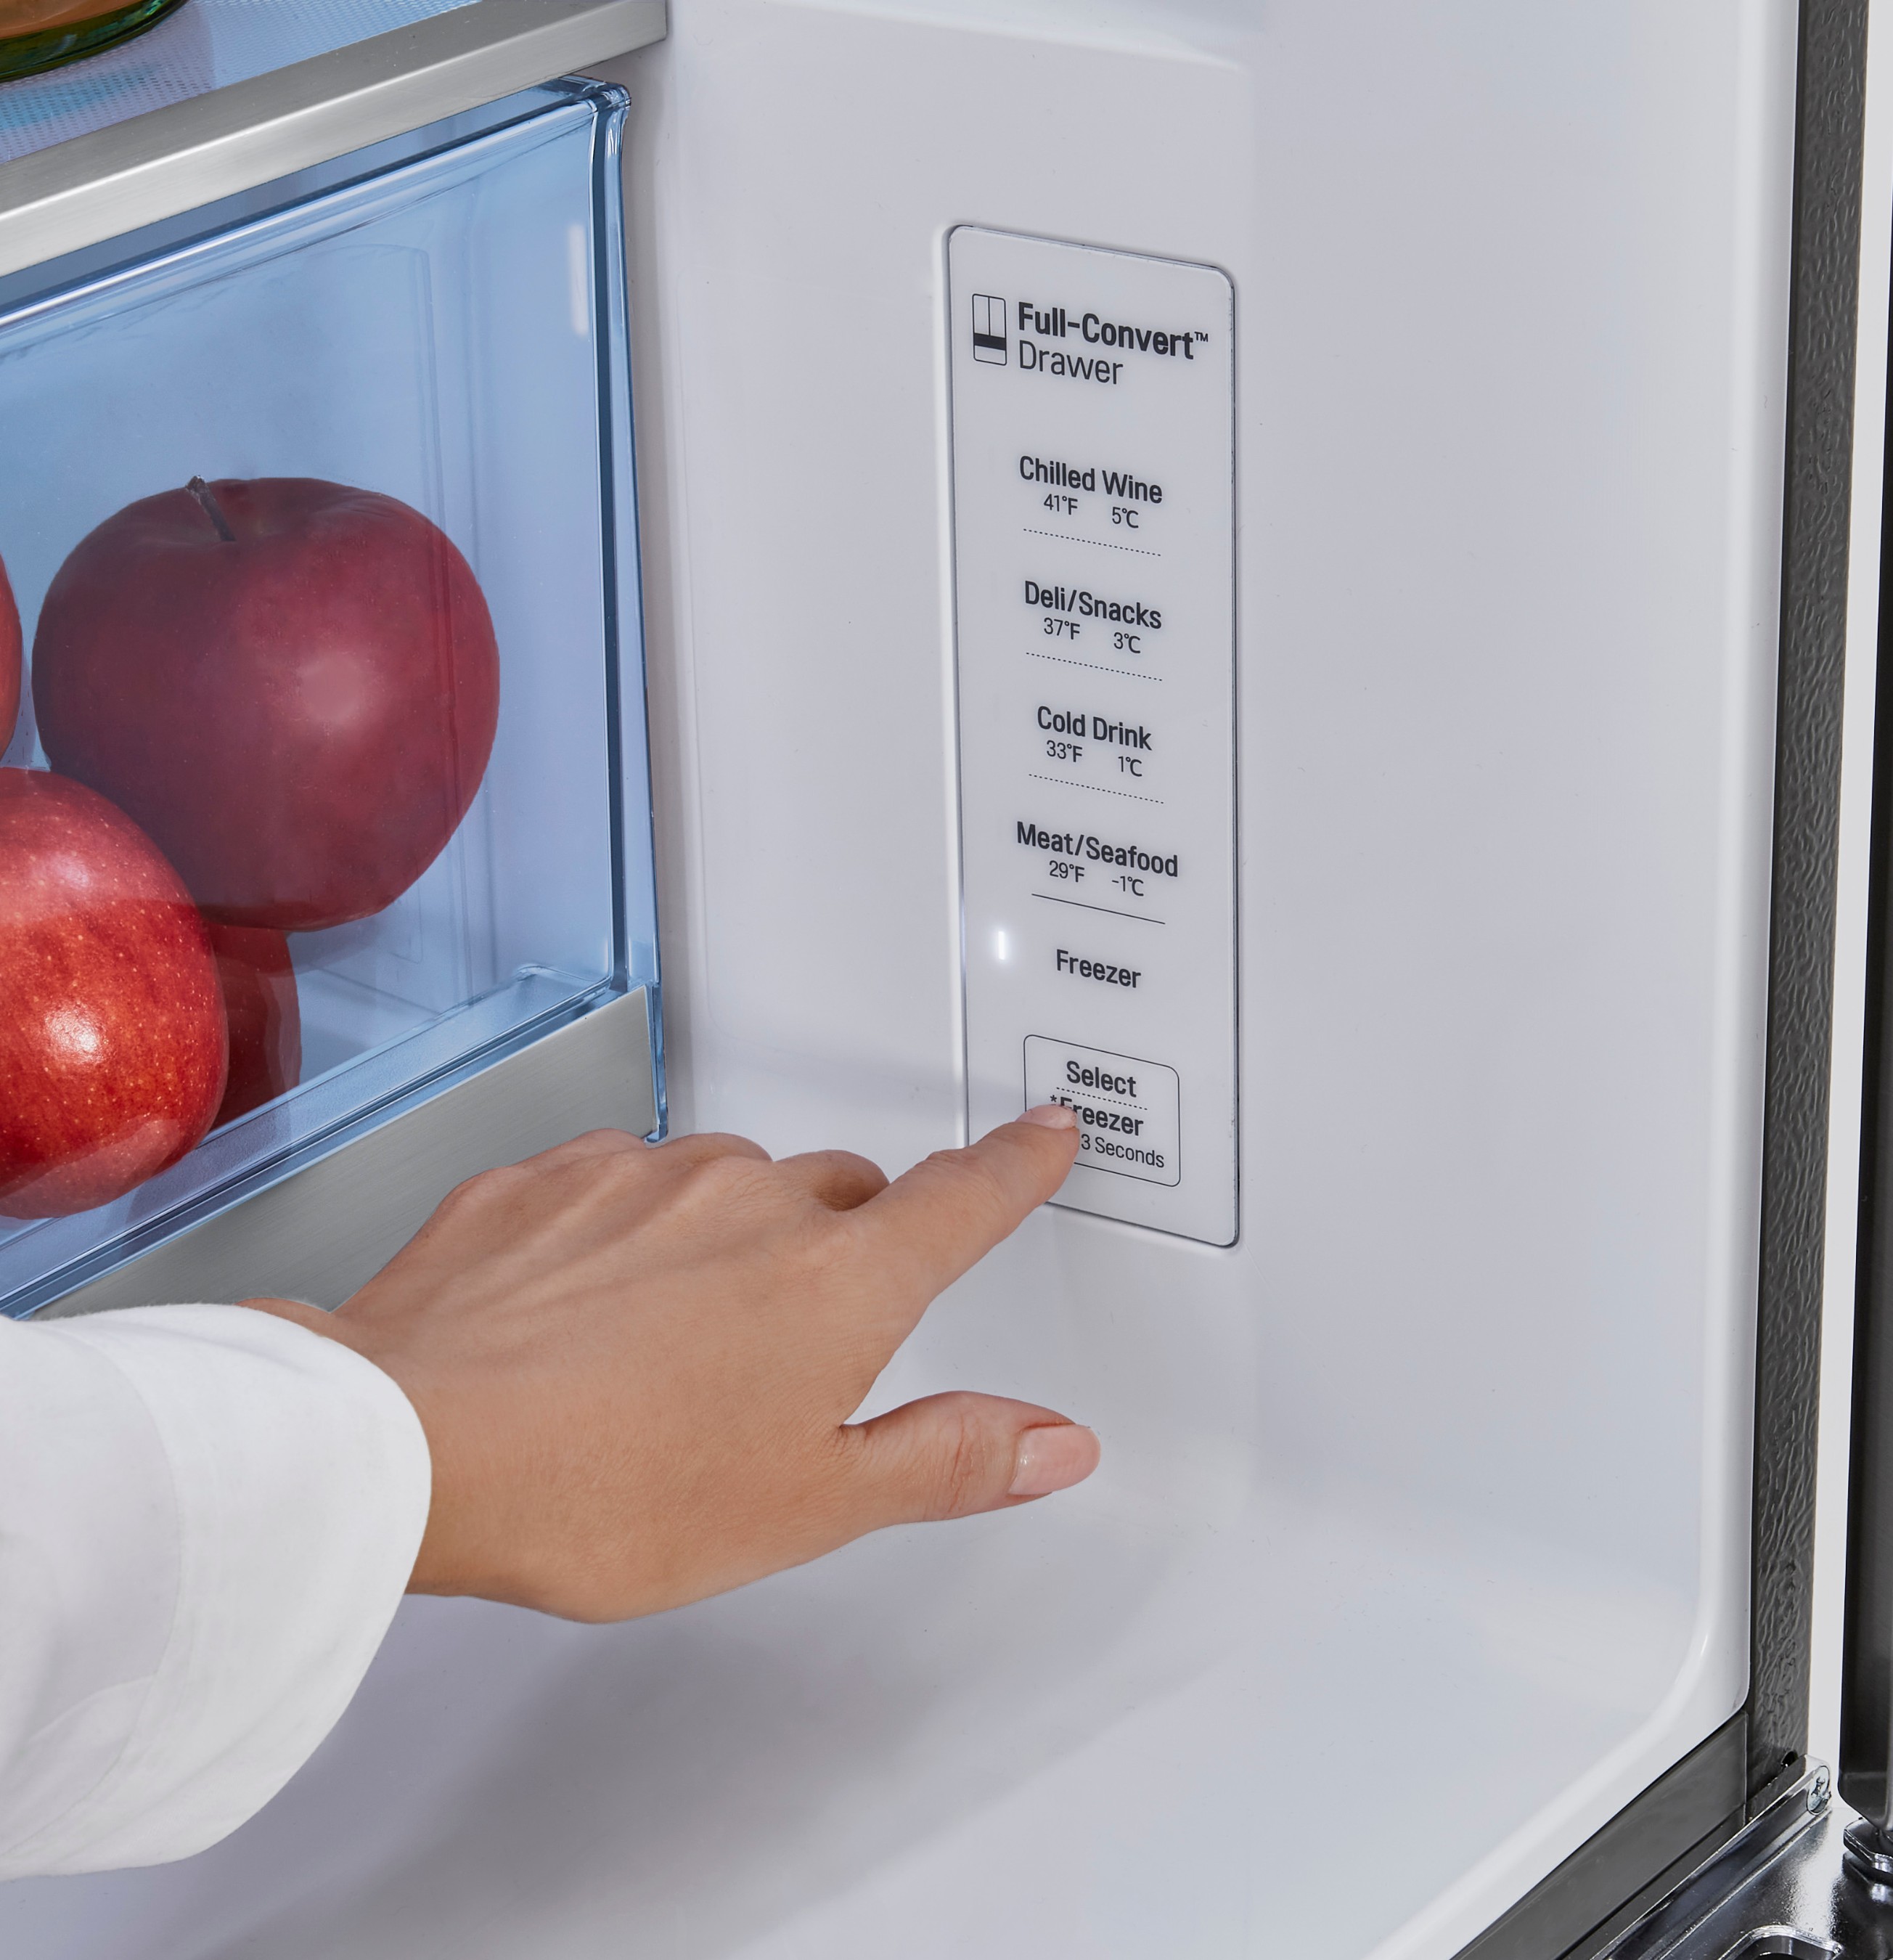 Consumers can choose from new featured-packed models with a versatile Full-Convert™ drawer that switches among five custom fridge to freezer temperatures.